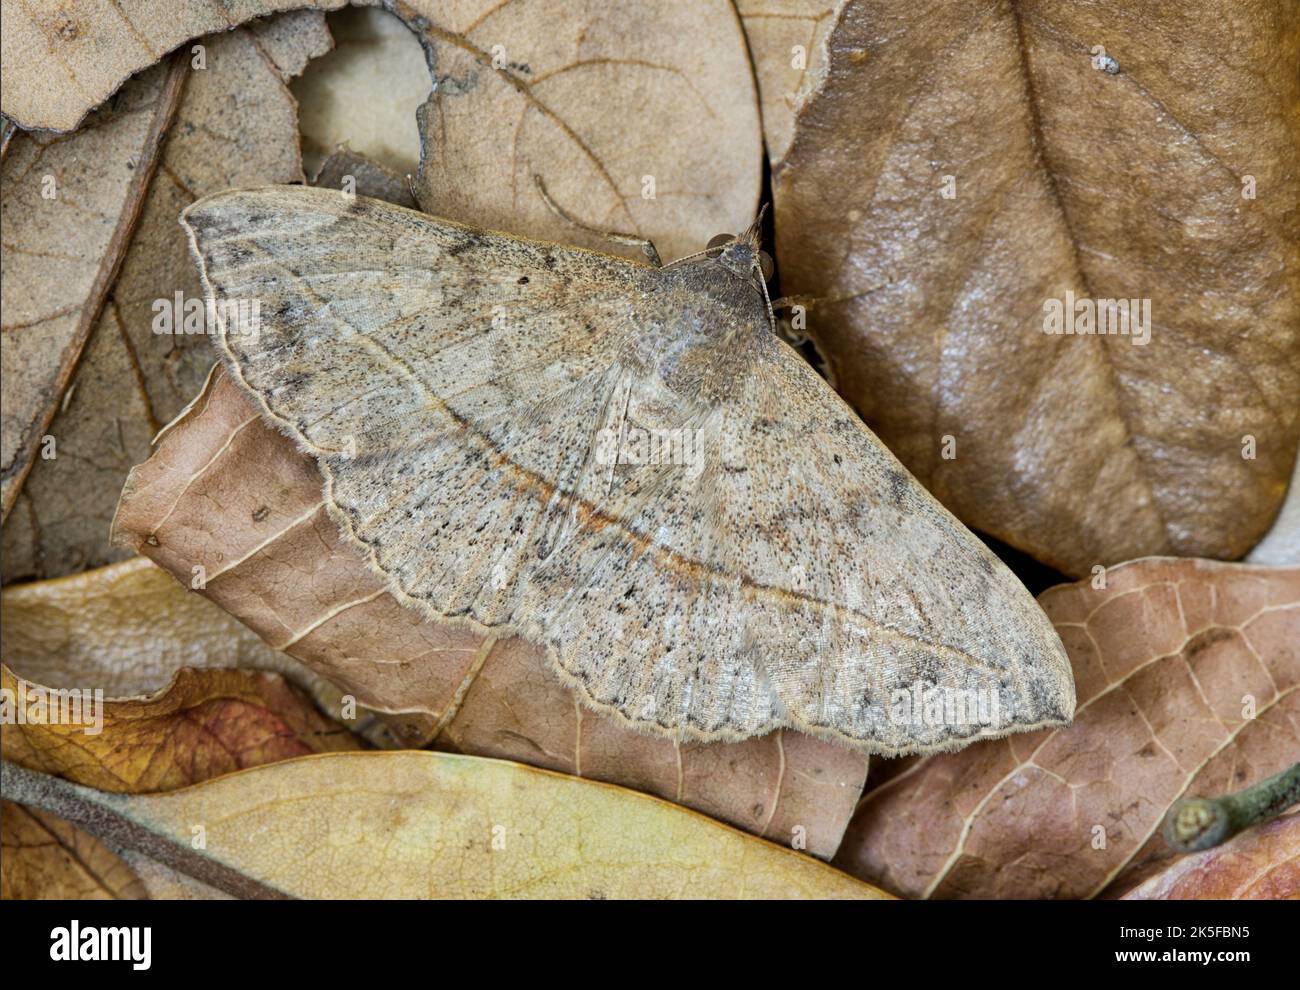 Velvetbean Moth (Anticarsia gemmatalis) with wings open, hidden camouflaged in dead leaves. Common species found in the Gulf States of the USA. Stock Photo